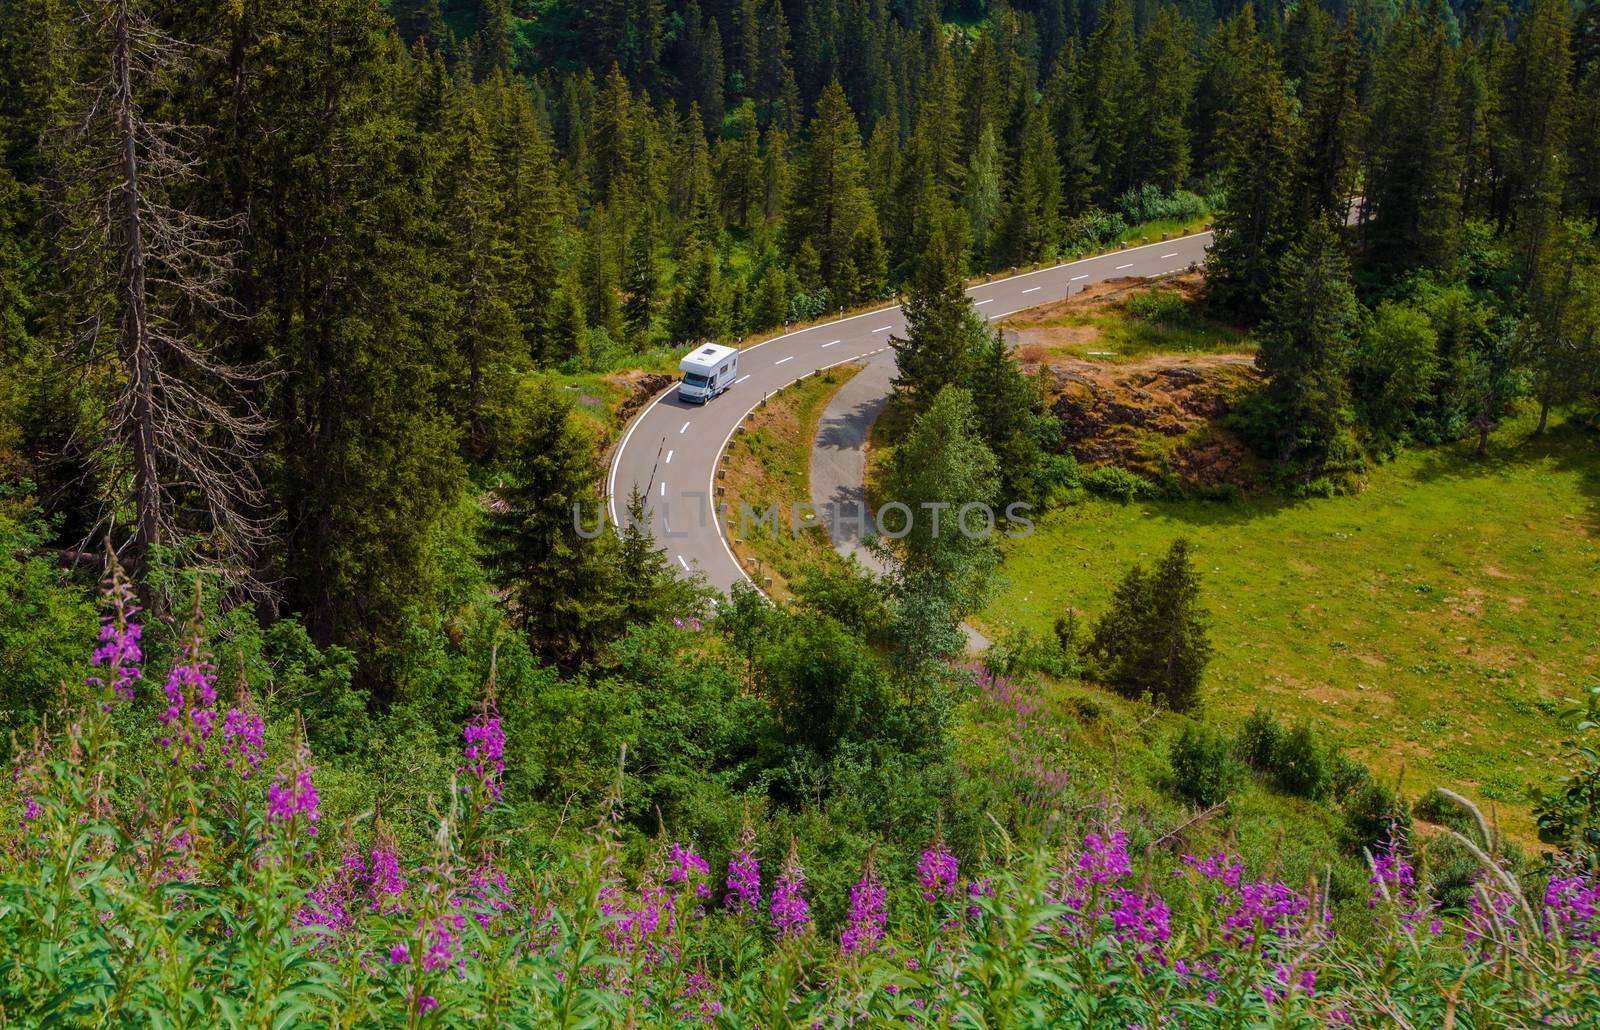 Camper Van Summer Travel. Rving Photo Theme. Small Class C Travel Camper on a Mountain Road During Summer Time.